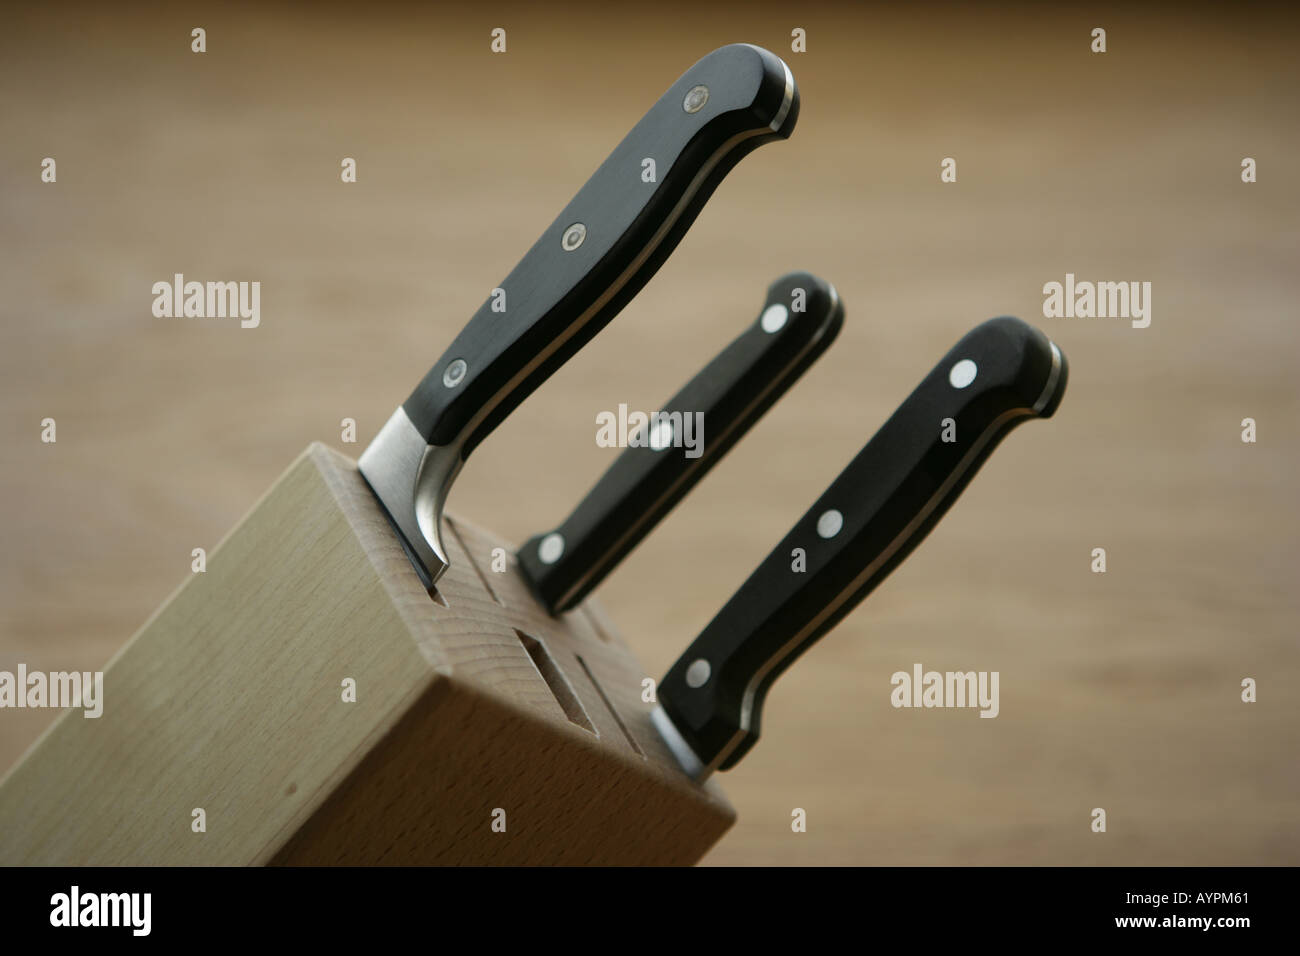 https://c8.alamy.com/comp/AYPM61/three-knives-kept-in-a-knife-holder-AYPM61.jpg